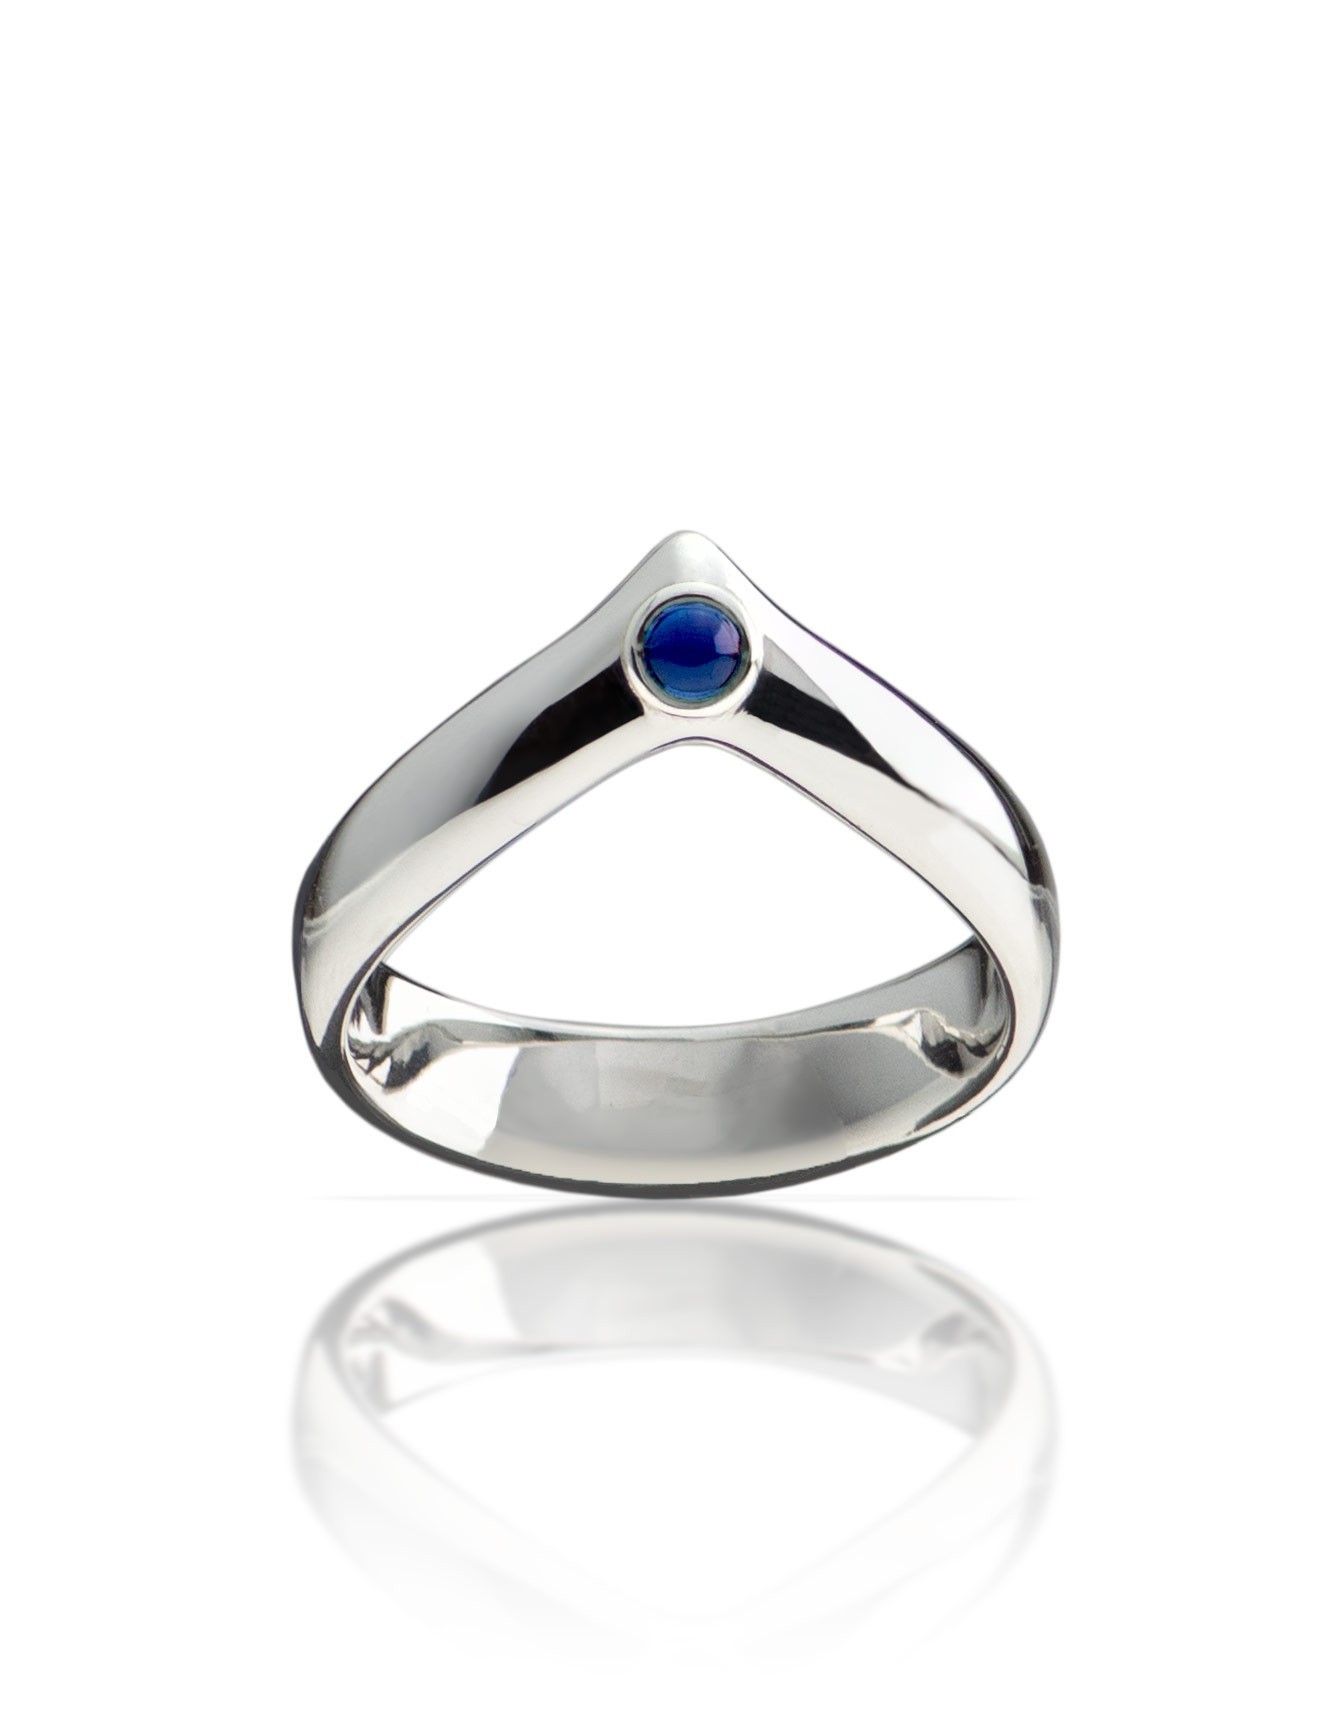 Stargazer Imperial Blue sterling silver penis (glans) ring by esculpta